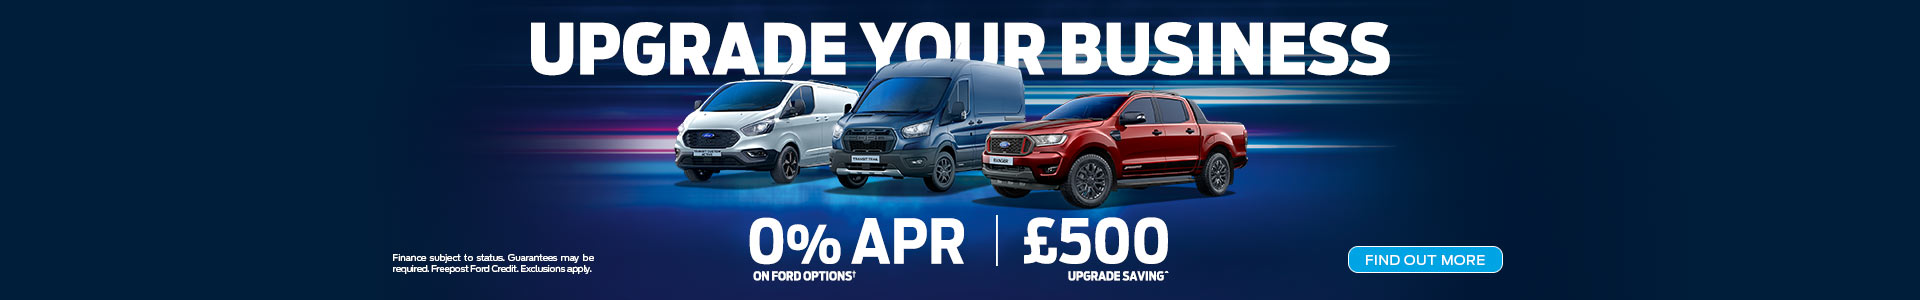 Upgrade your business - great deal for commercial vehicles